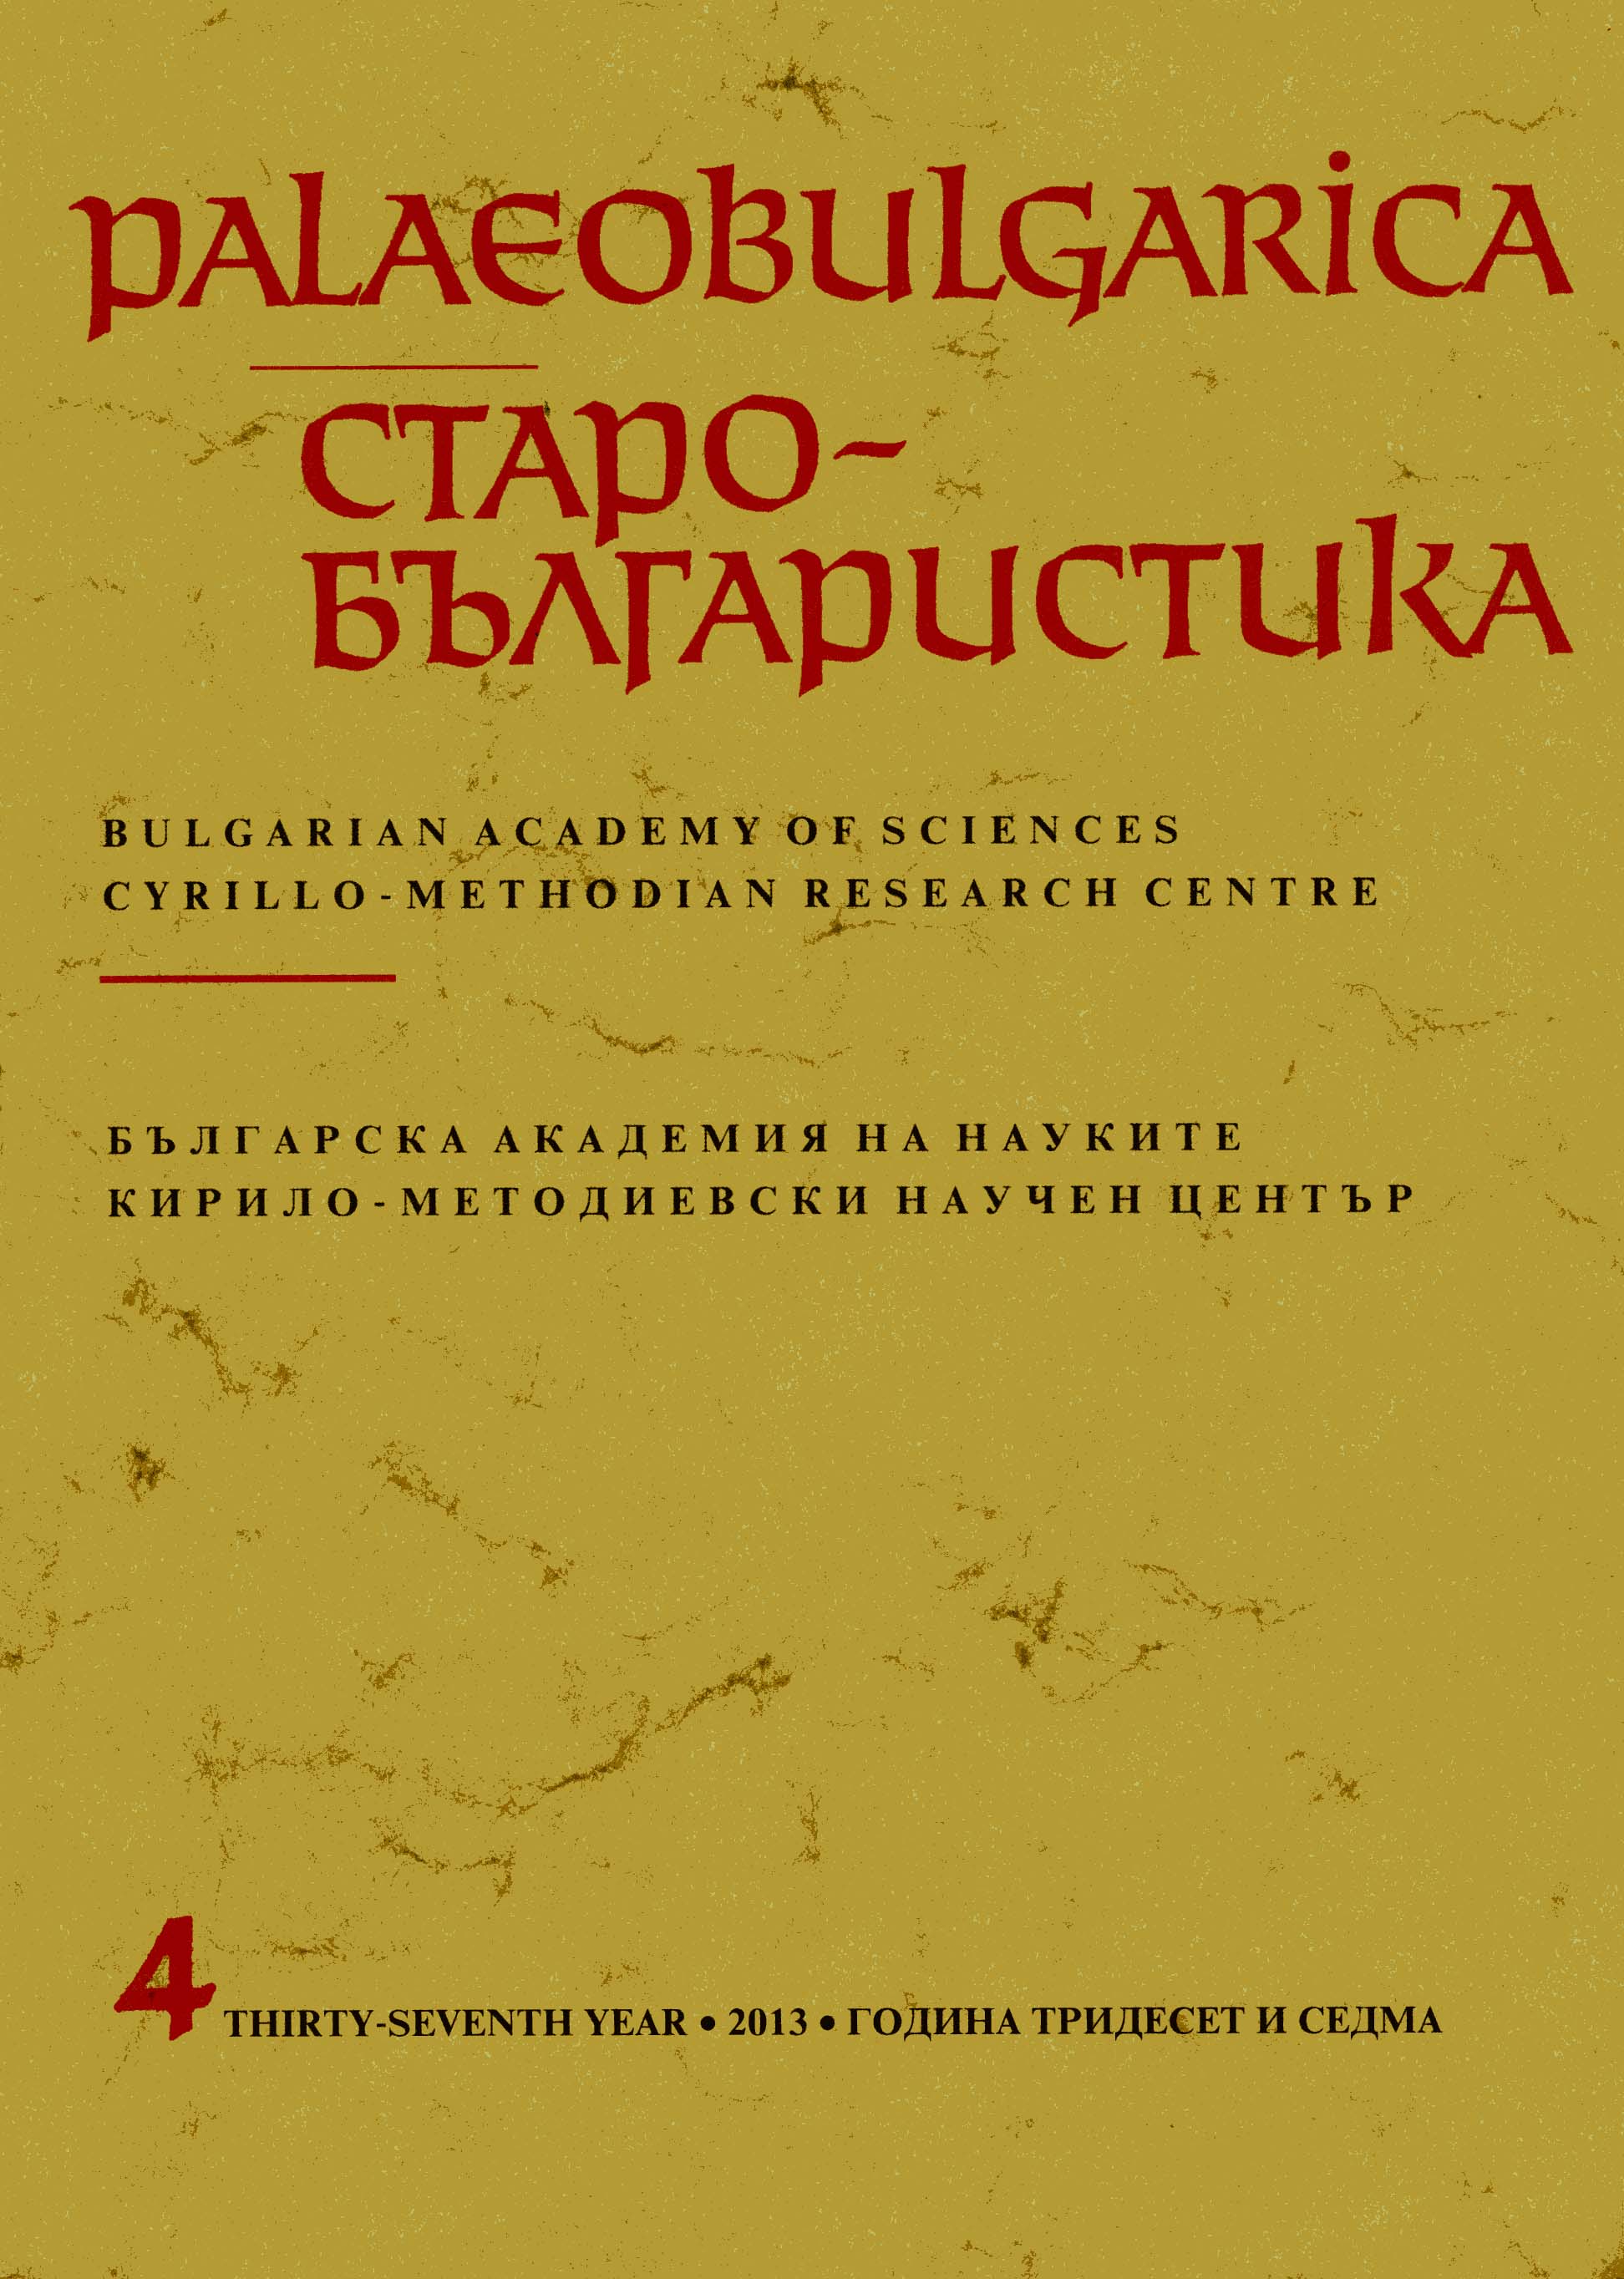 Ad fontes. On the 1150 Anniversary of the Slavonic Literature Cover Image